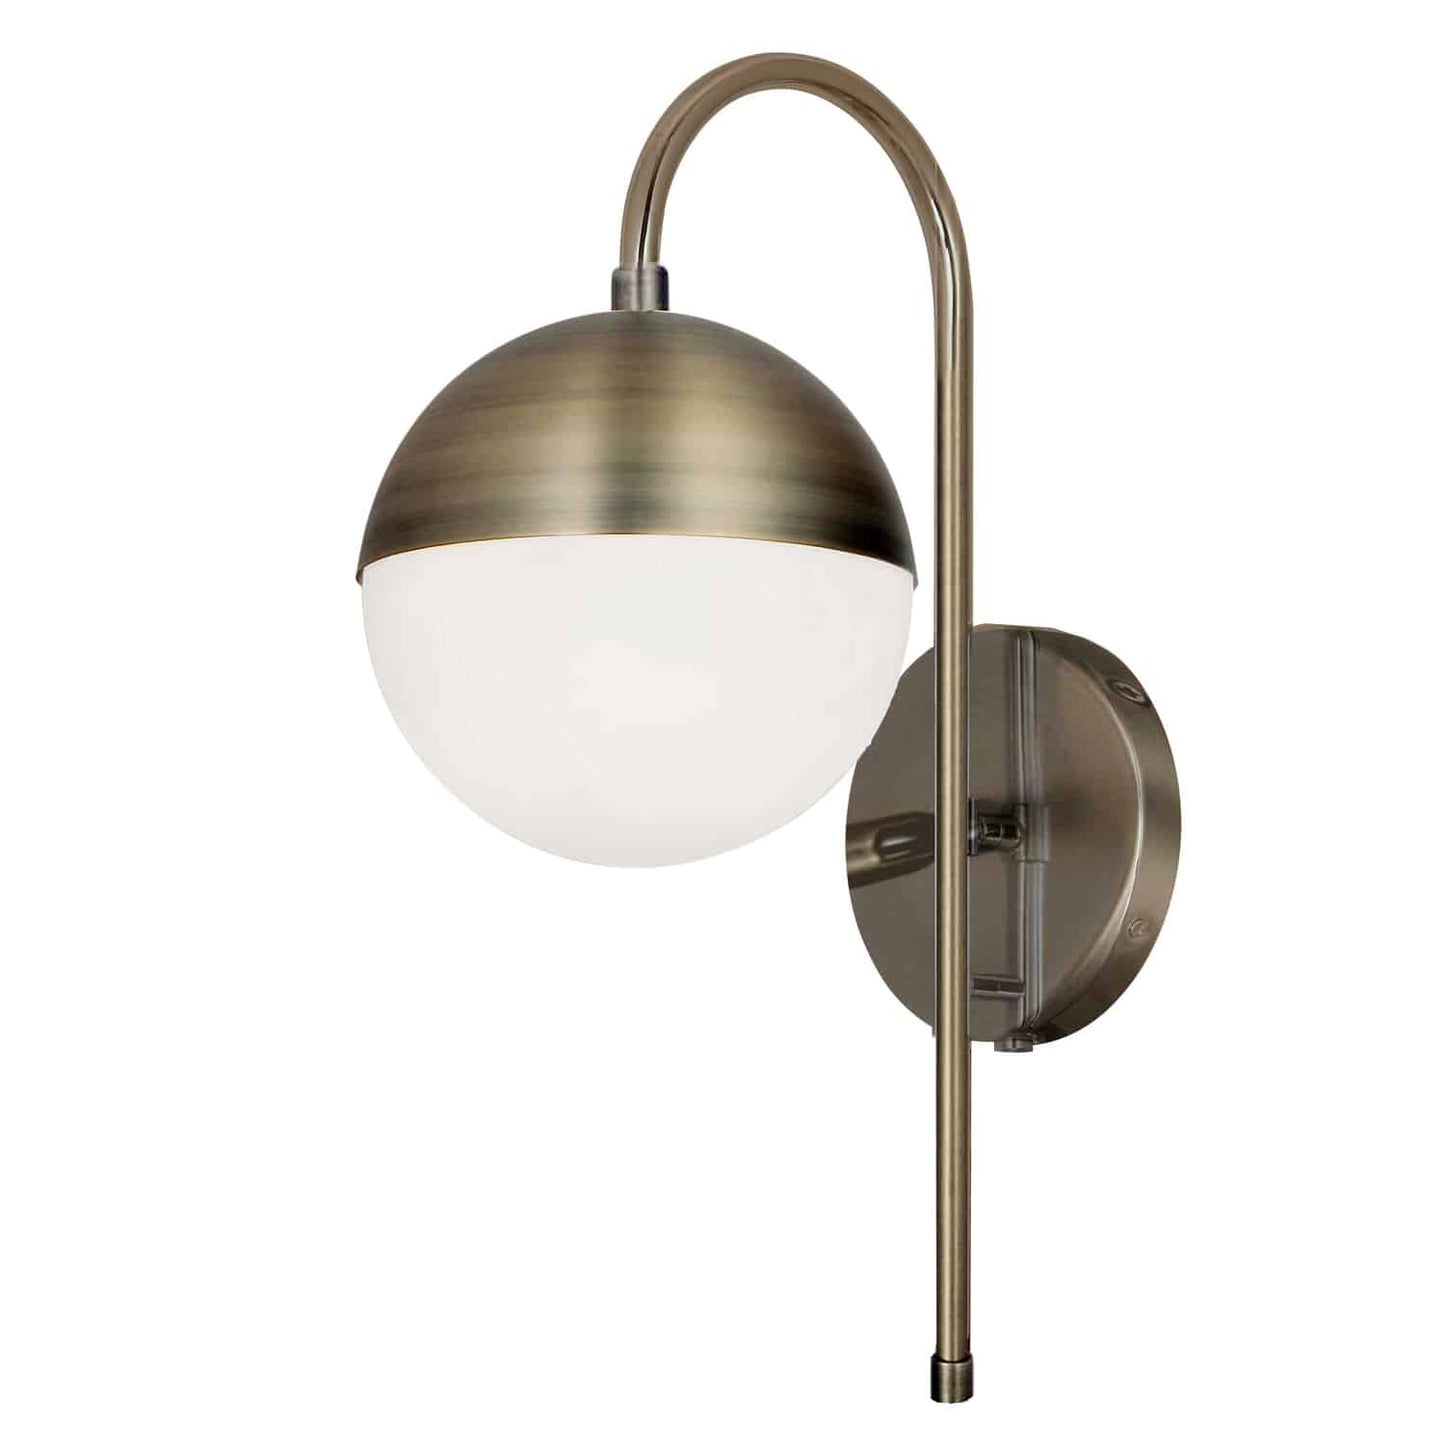 Dainolite DAY-71W-AB 1 Light Halogen Sconce, Antique Brass with White Glass, Hardwire and Plug-In